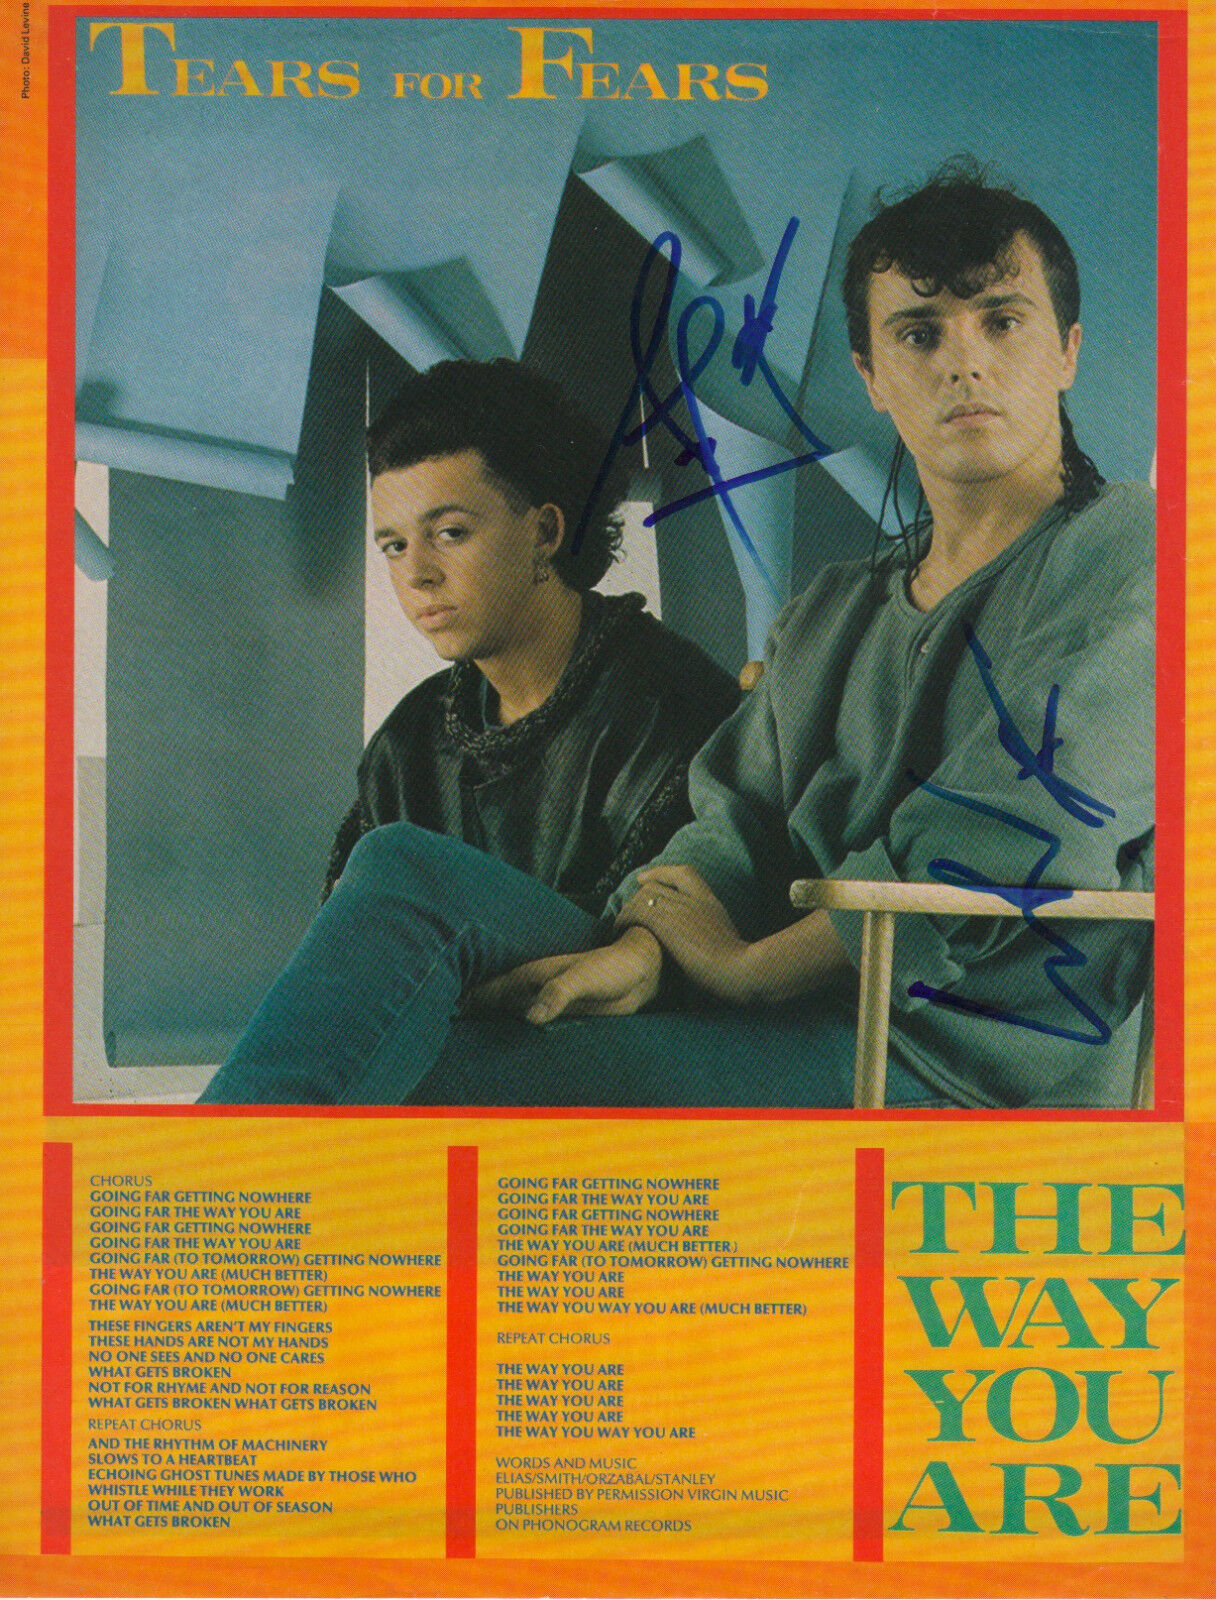 Tears For Fears signed 8x11 inch magazine-picture autographs